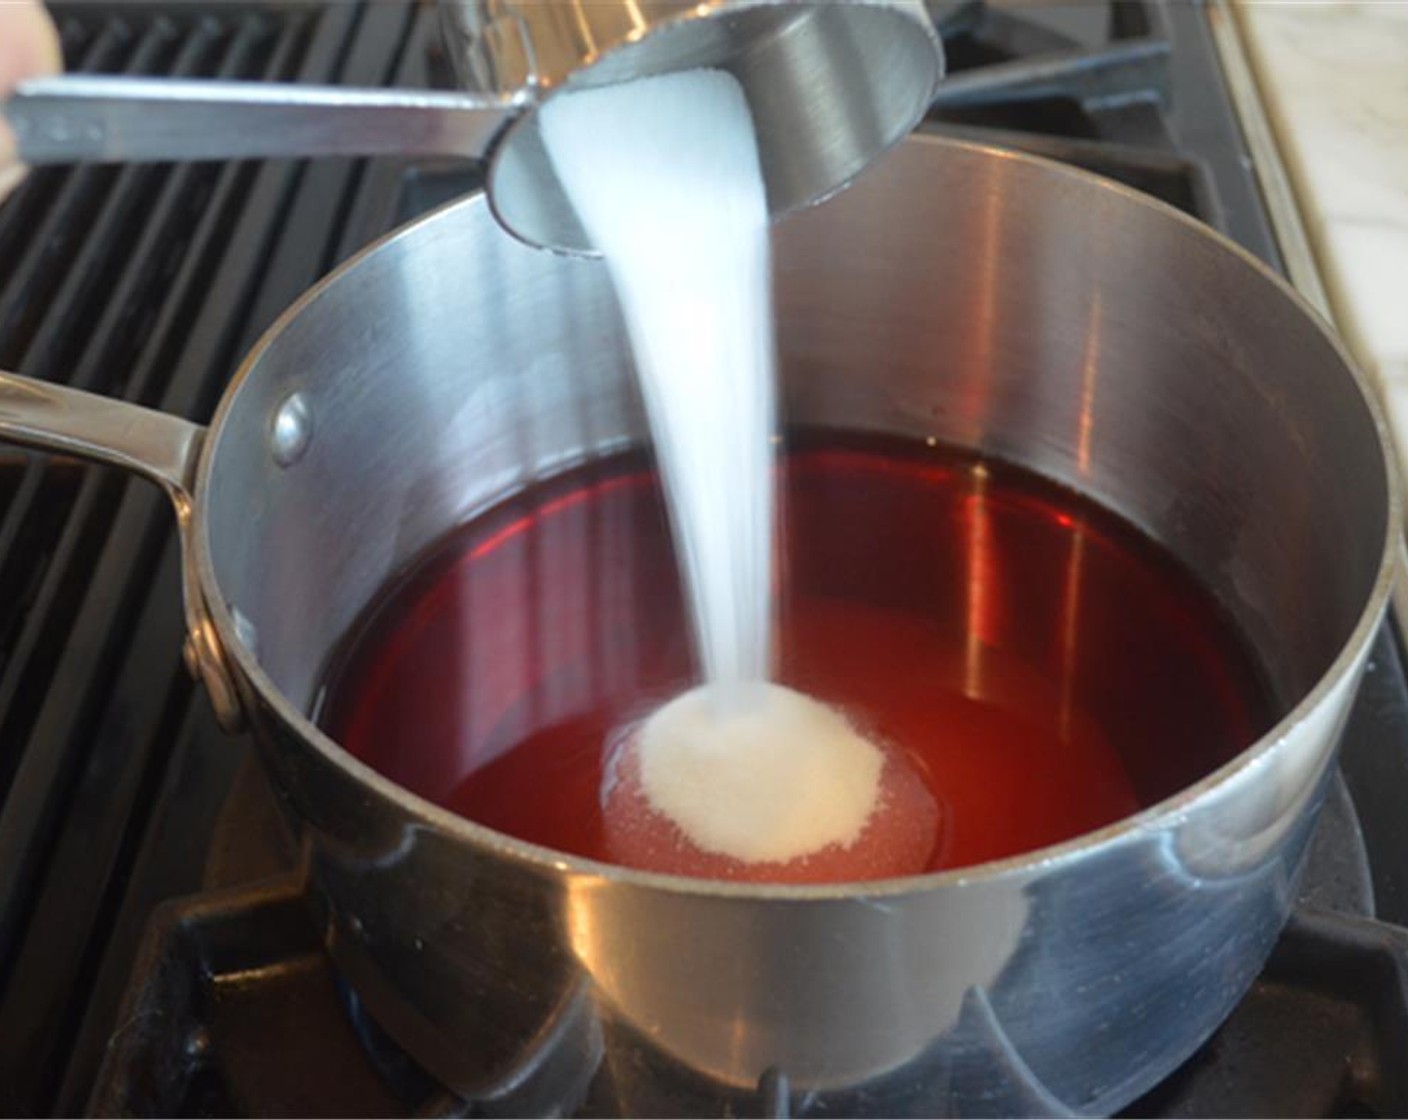 step 2 Combine Unsweetened Pomegranate Juice (1 1/2 cups) and Granulated Sugar (3/4 cup) in a saucepan. Bring to a boil over high heat, stirring until the sugar is completely dissolved. Boil for 1 minute.